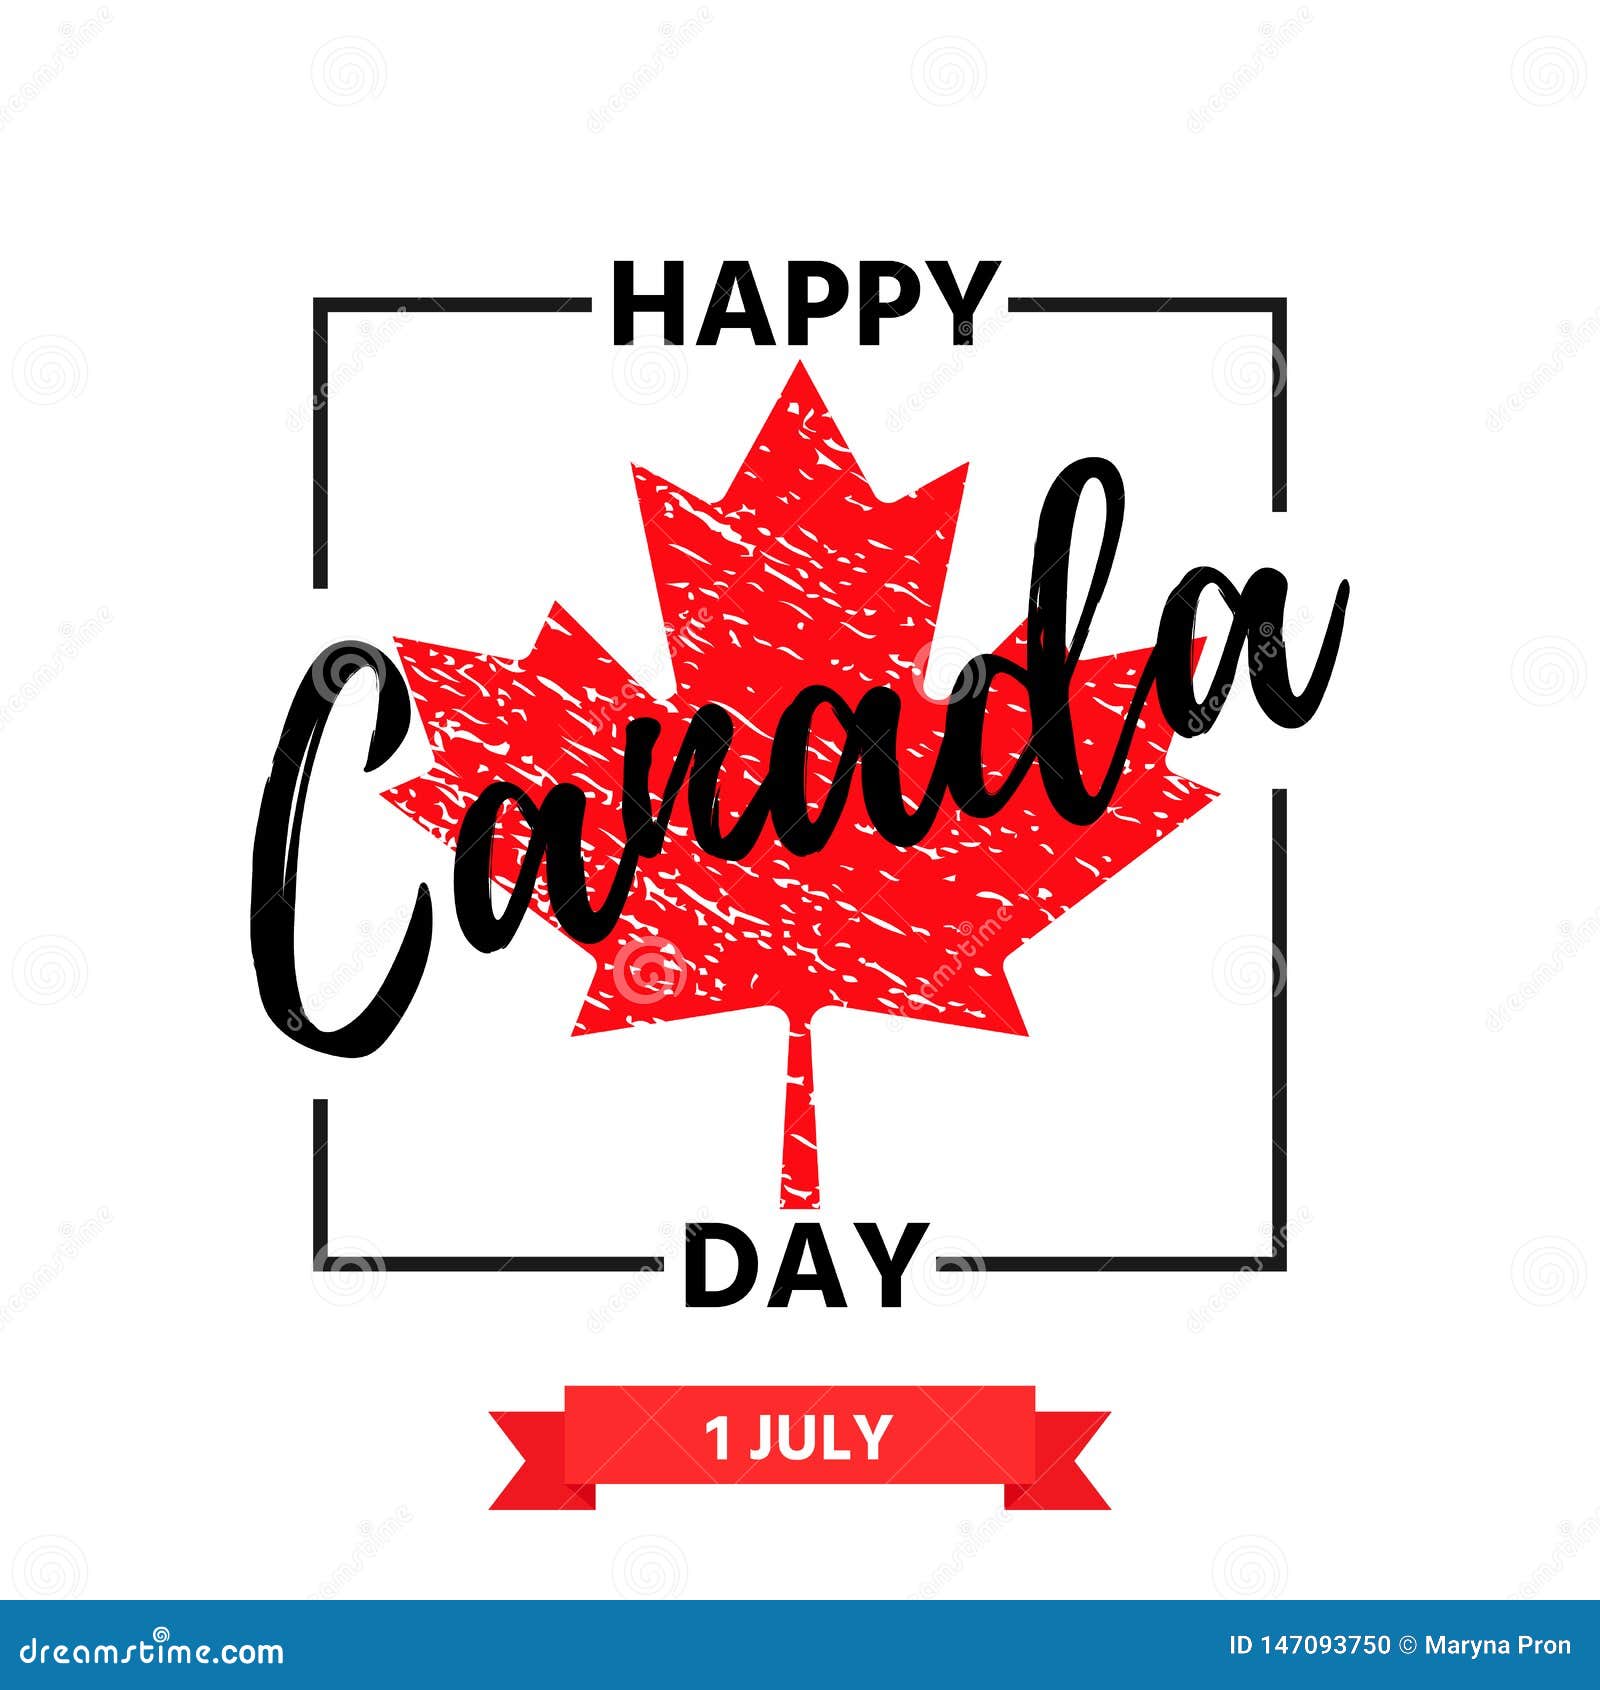 Happy Canada Day Banner Vector Illustration Holiday Design Stock